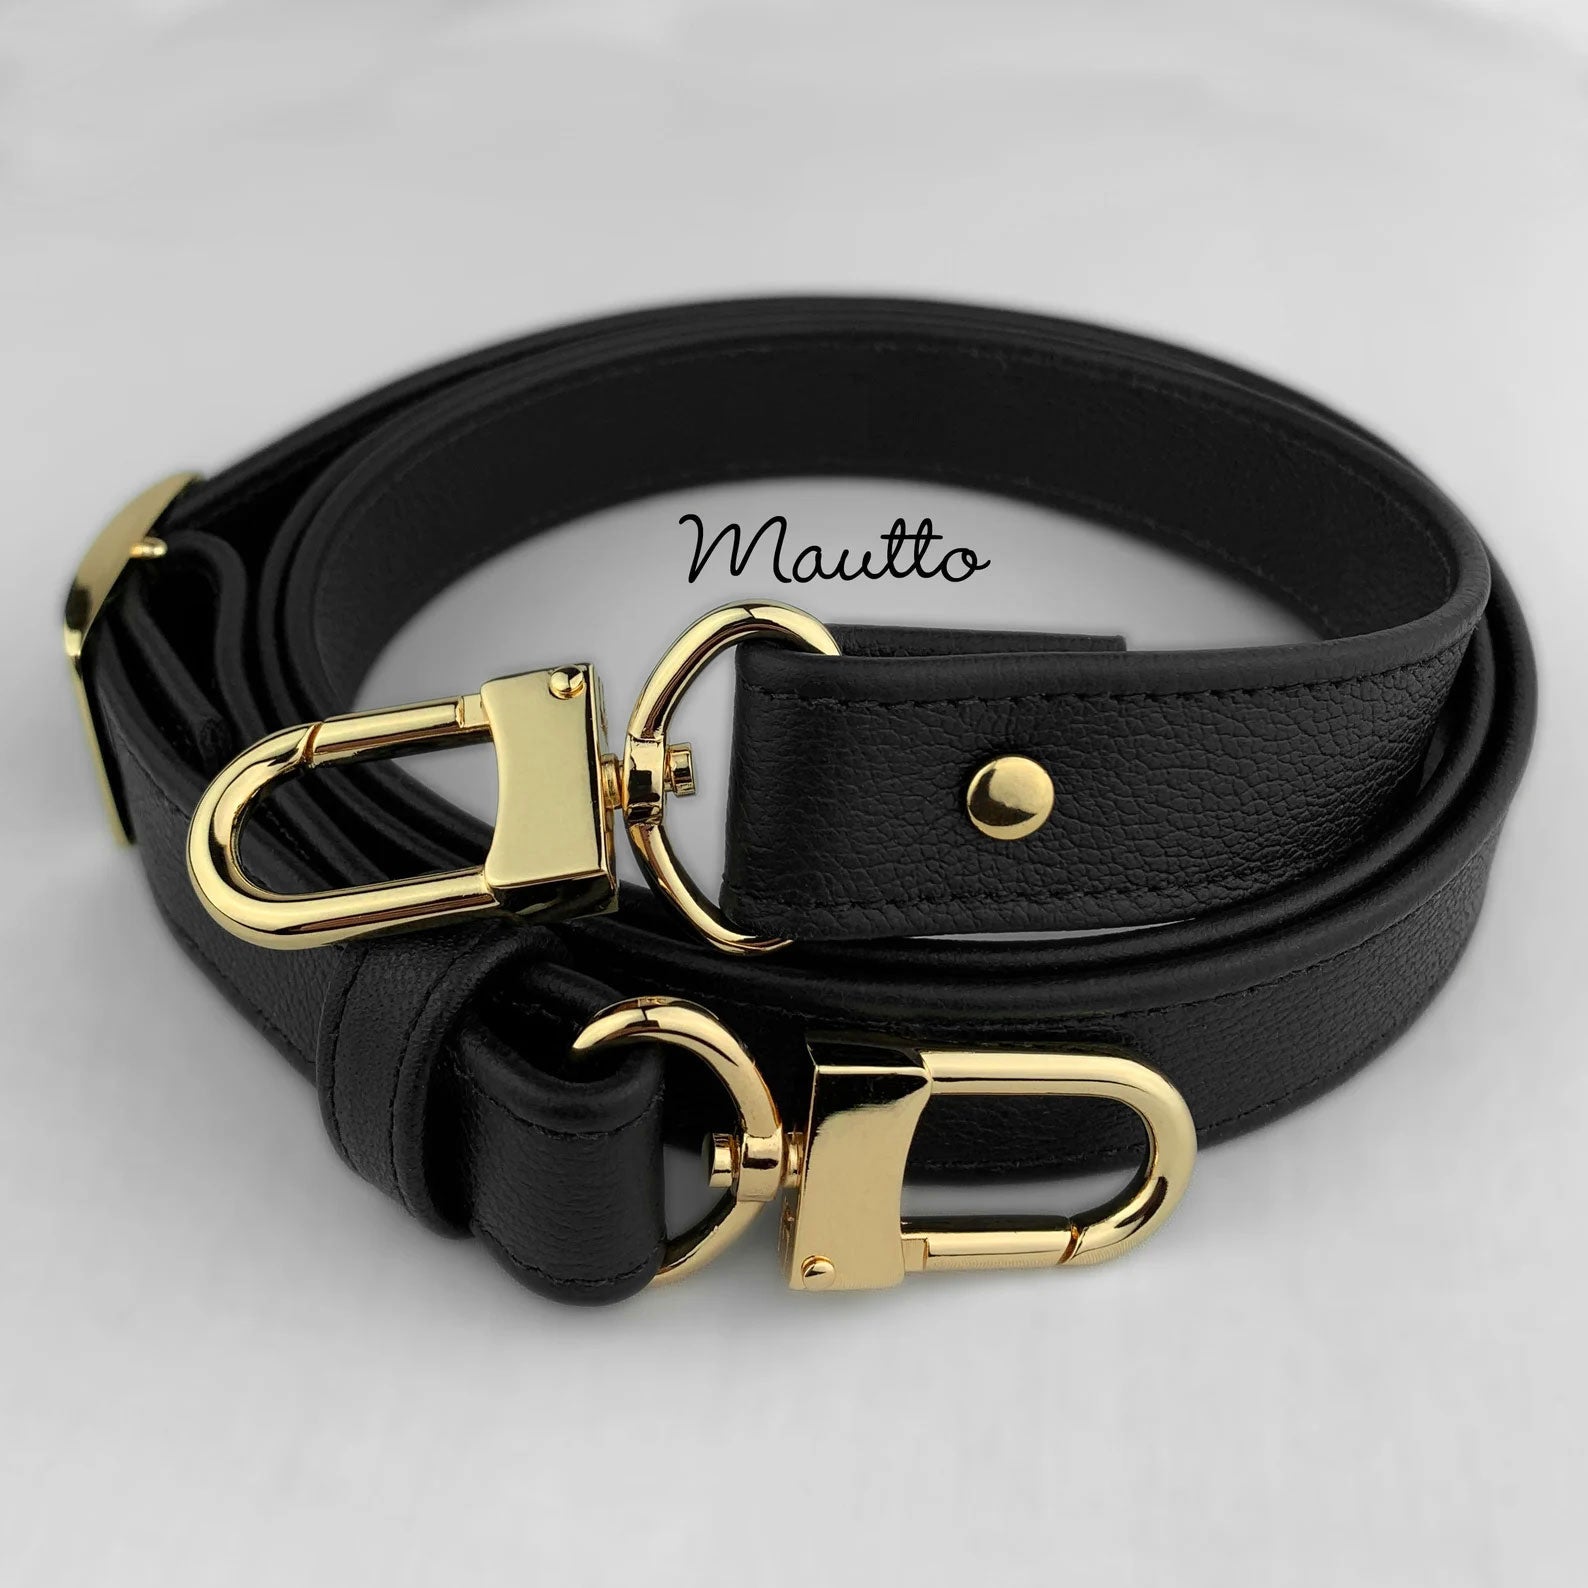 Black Pebble Adjustable Leather Strap - 1 inch Wide (25mm) - Shoulder to Crossbody Lengths - Choice of Connector Style/Finish